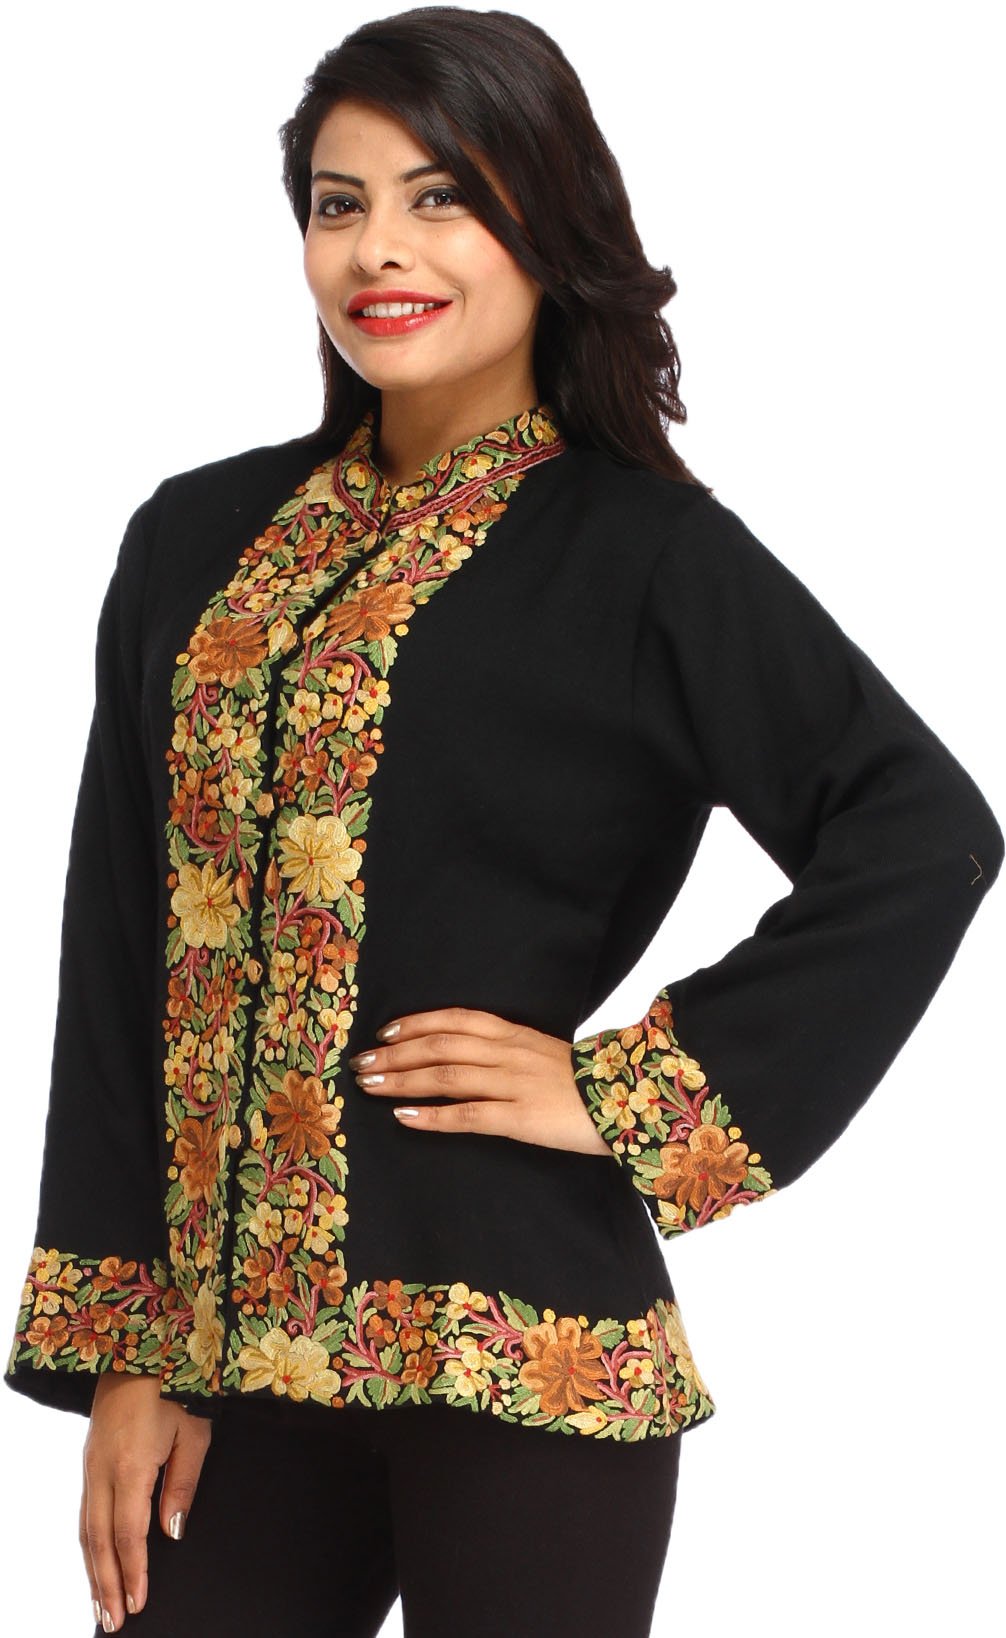 Caviar-Black Jacket from Kashmir with Ari Embroidered Flowers